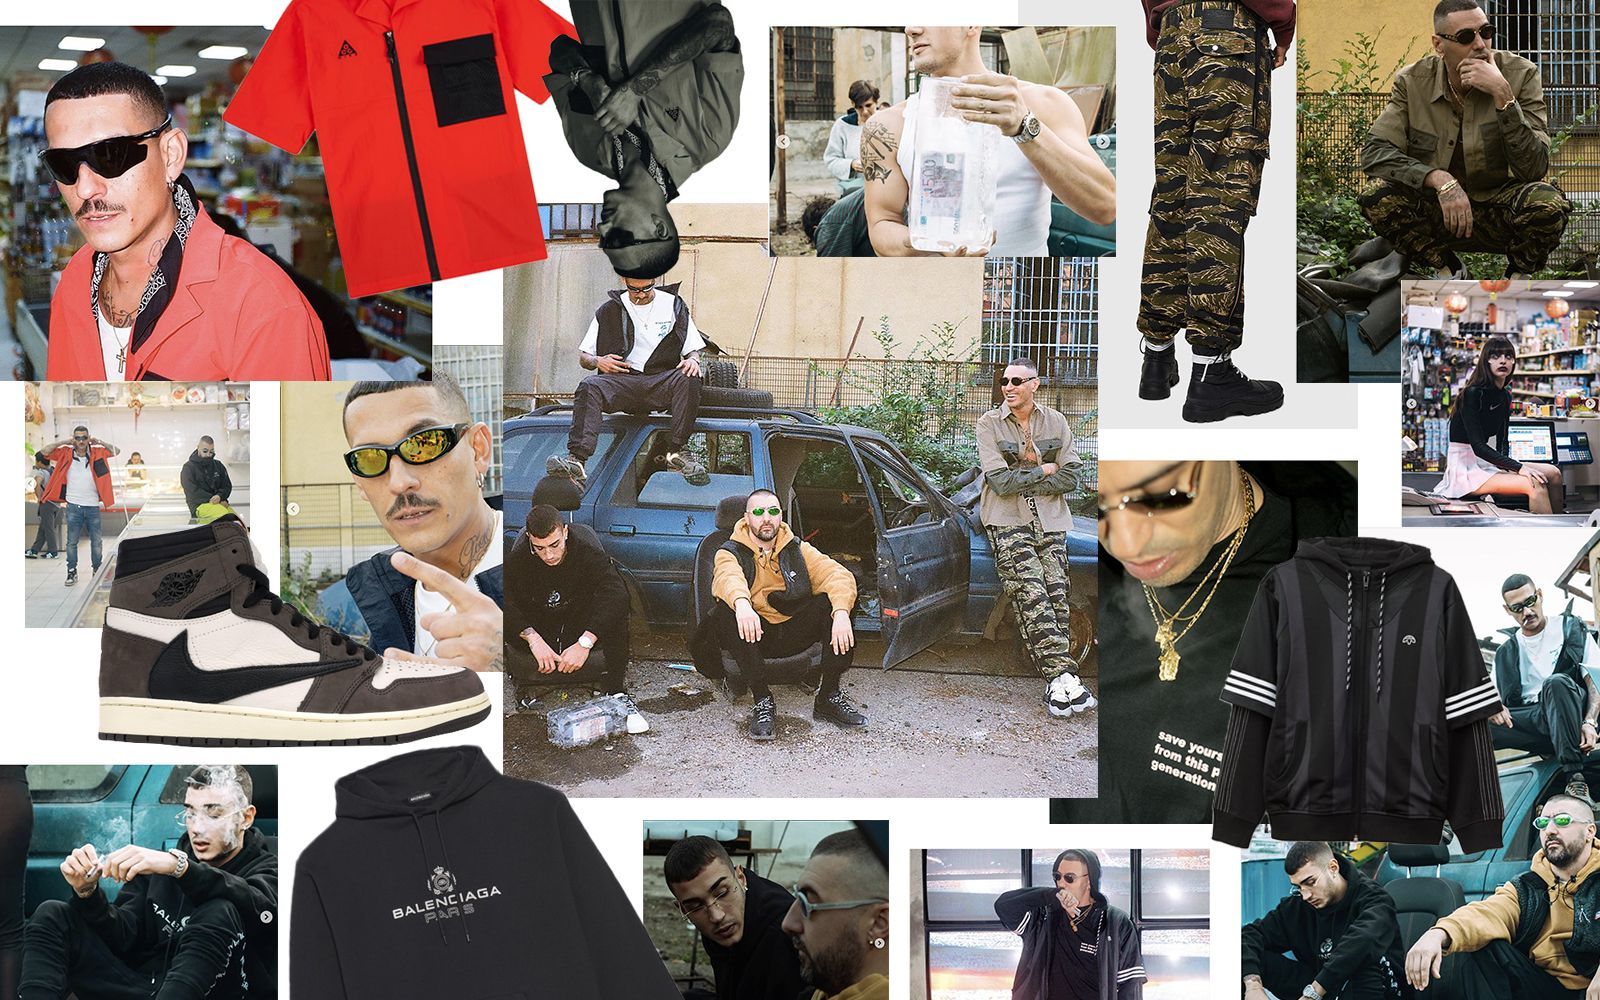 Dress like: Street Advisor The best items from the new Night Skinny's video, ft. Noyz Narcos, Marracash and Capo Plaza